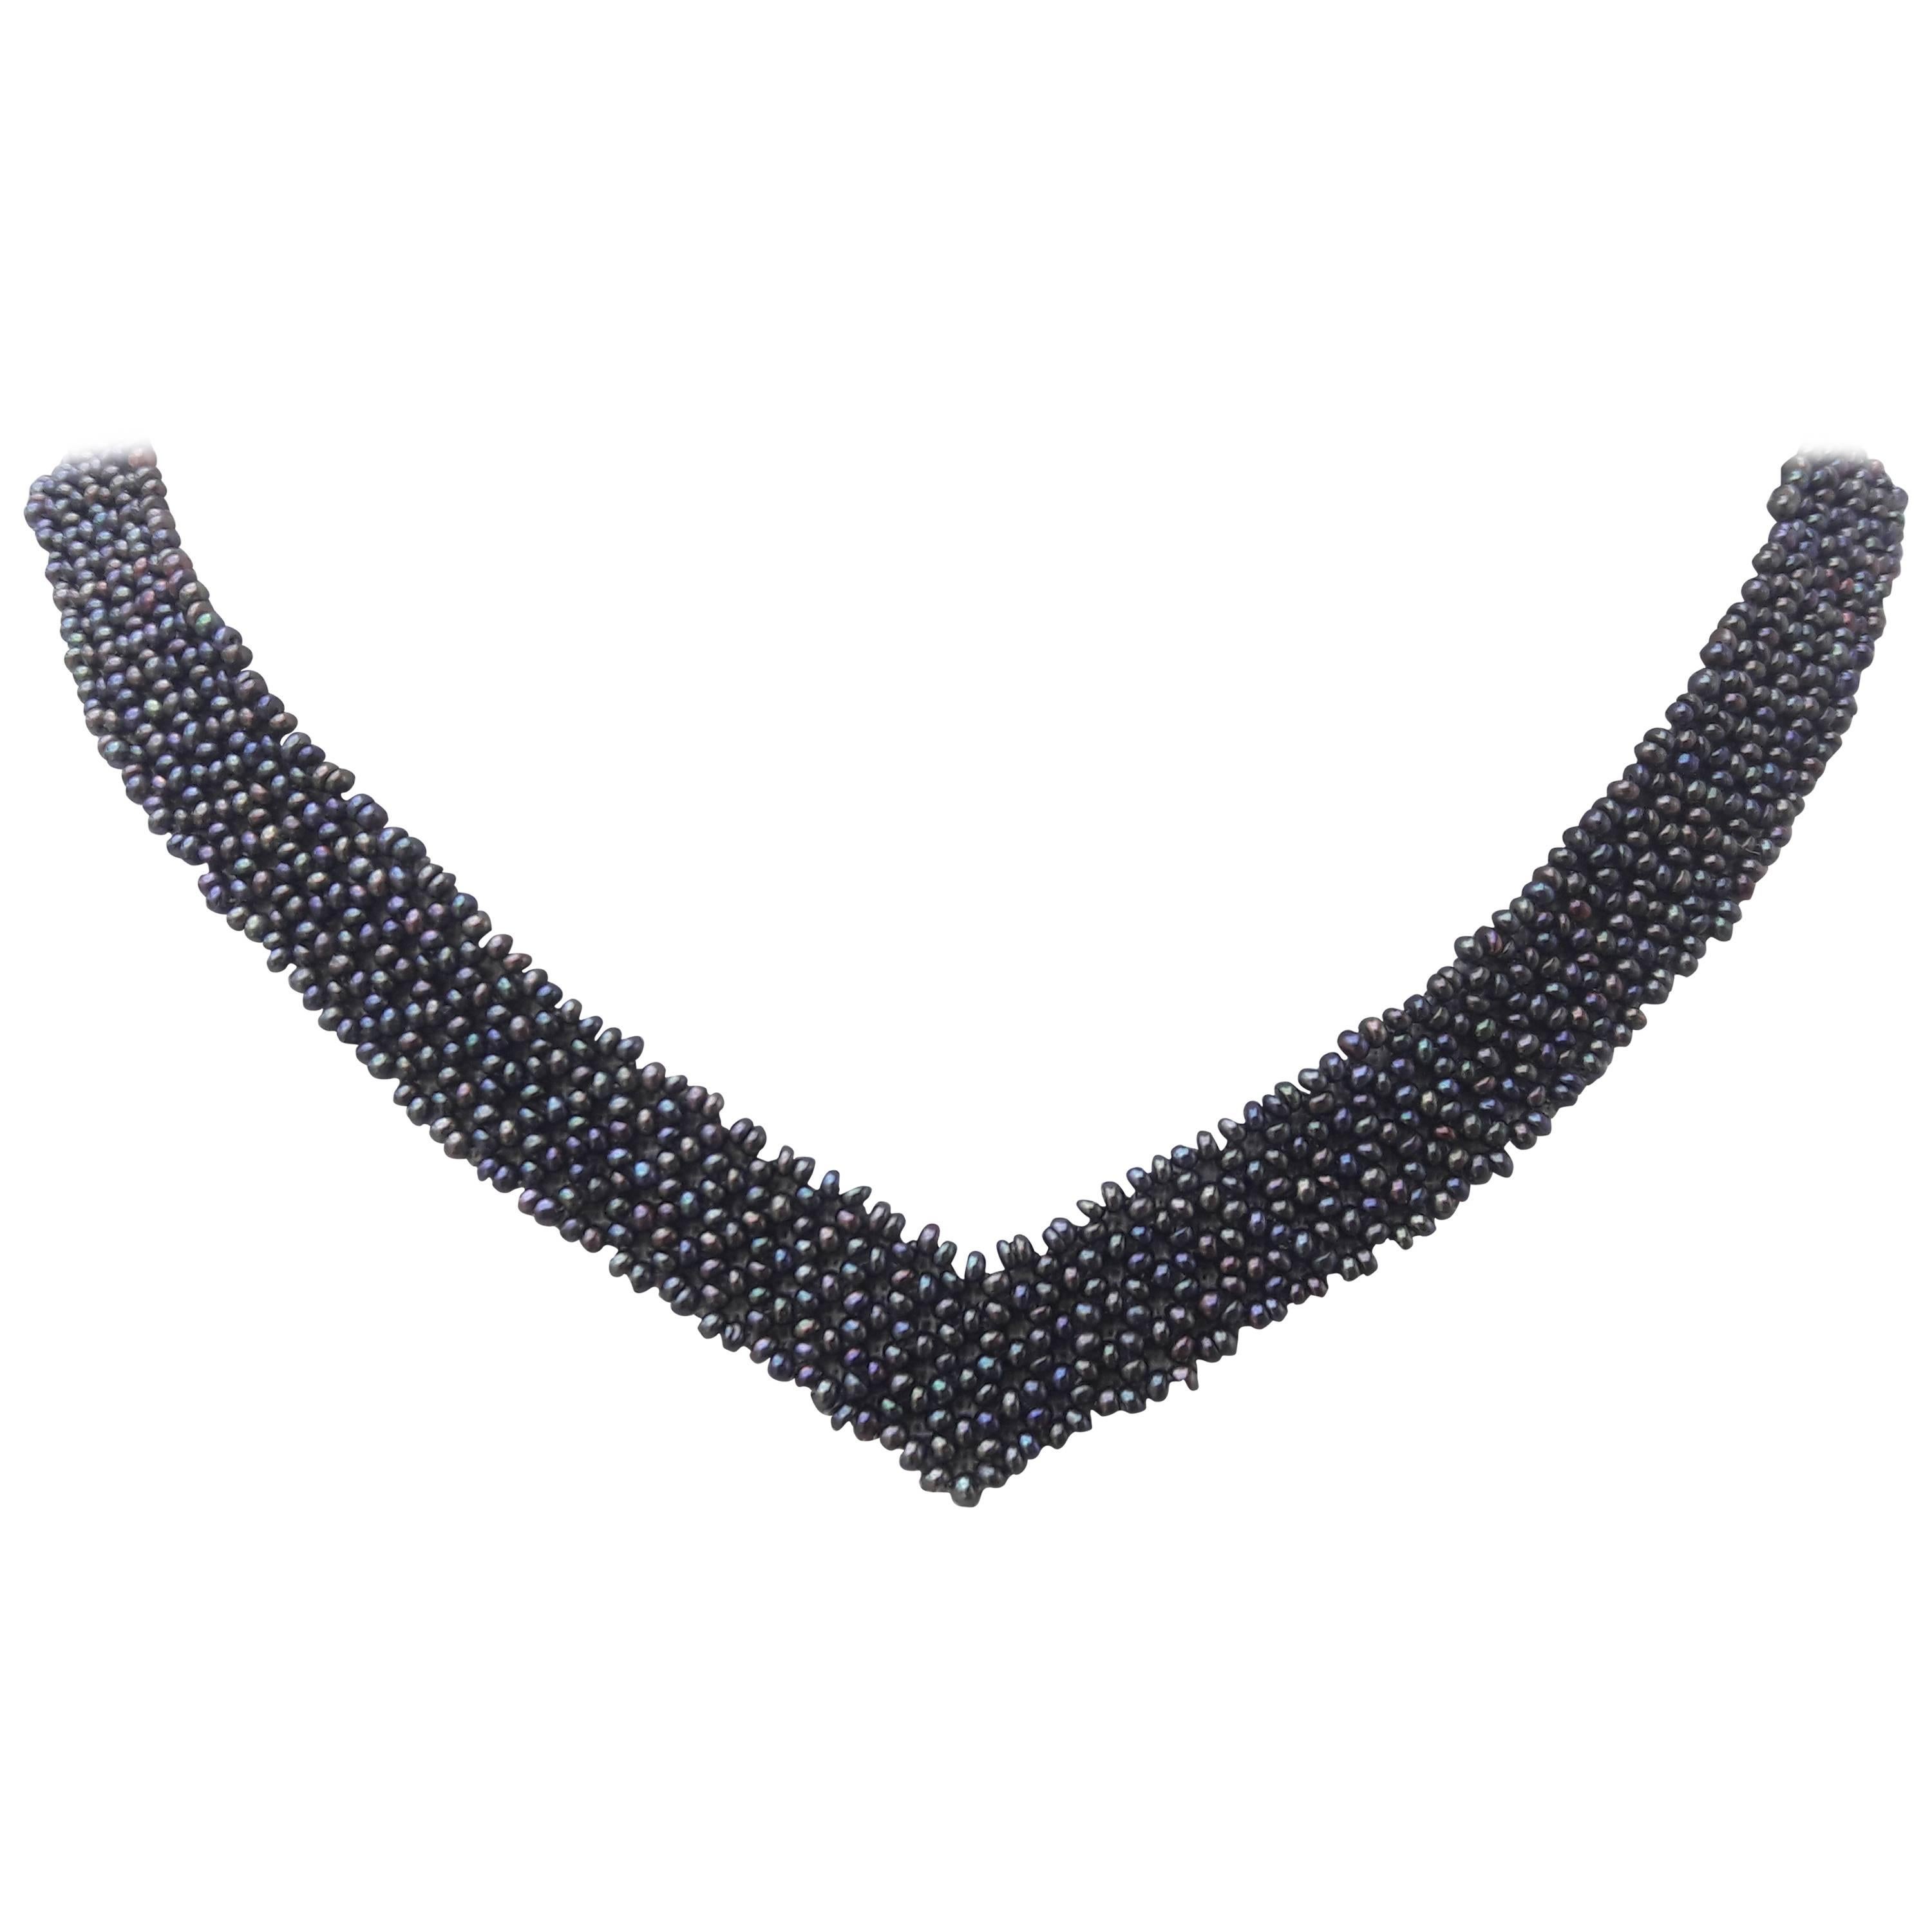 Marina J Woven Black Pearl "V" shaped Necklace with Unique 14K Yellow Gold Clasp